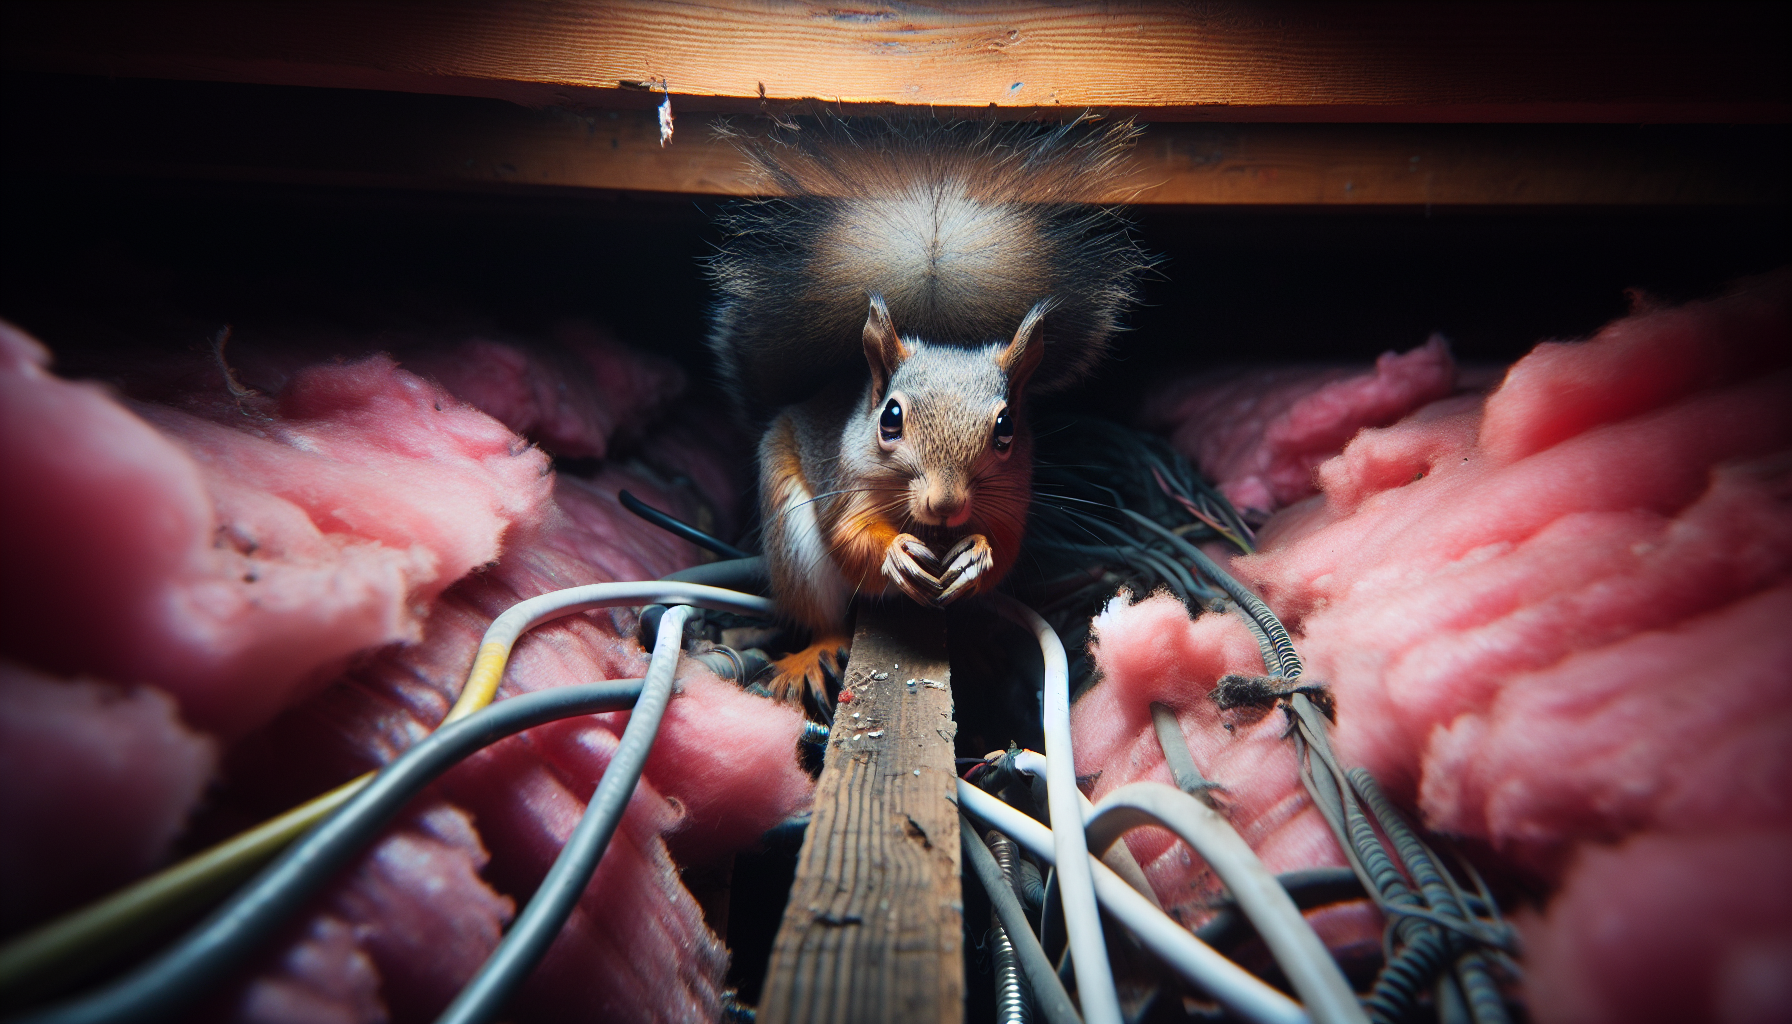 a squirrel is sitting in an attic surrounded by wires and pink insulation